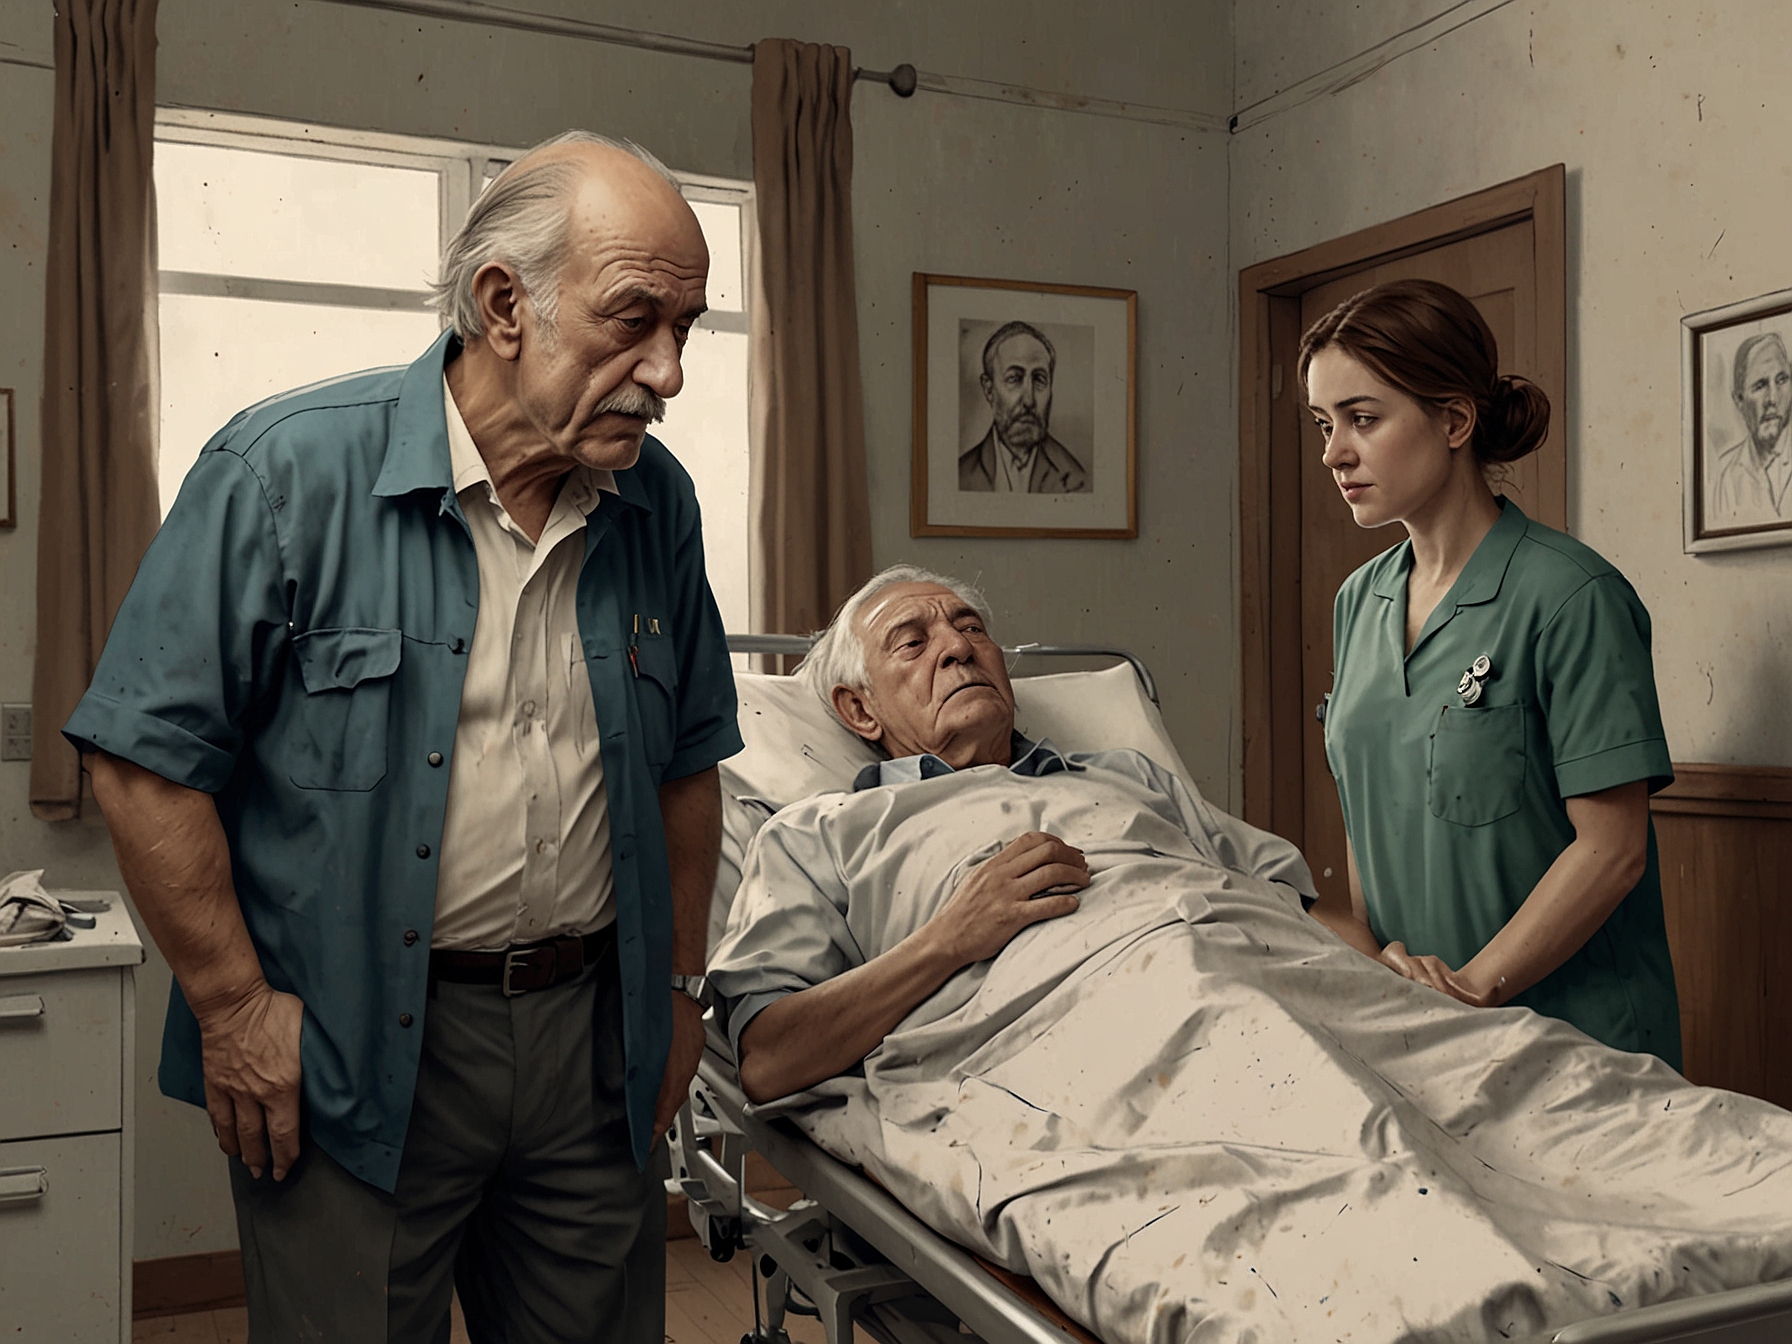 A distressed family in a Turkish hospital looking worried as the grandfather receives intensive medical care. The scene emphasizes the sudden and harrowing nature of medical emergencies while traveling.